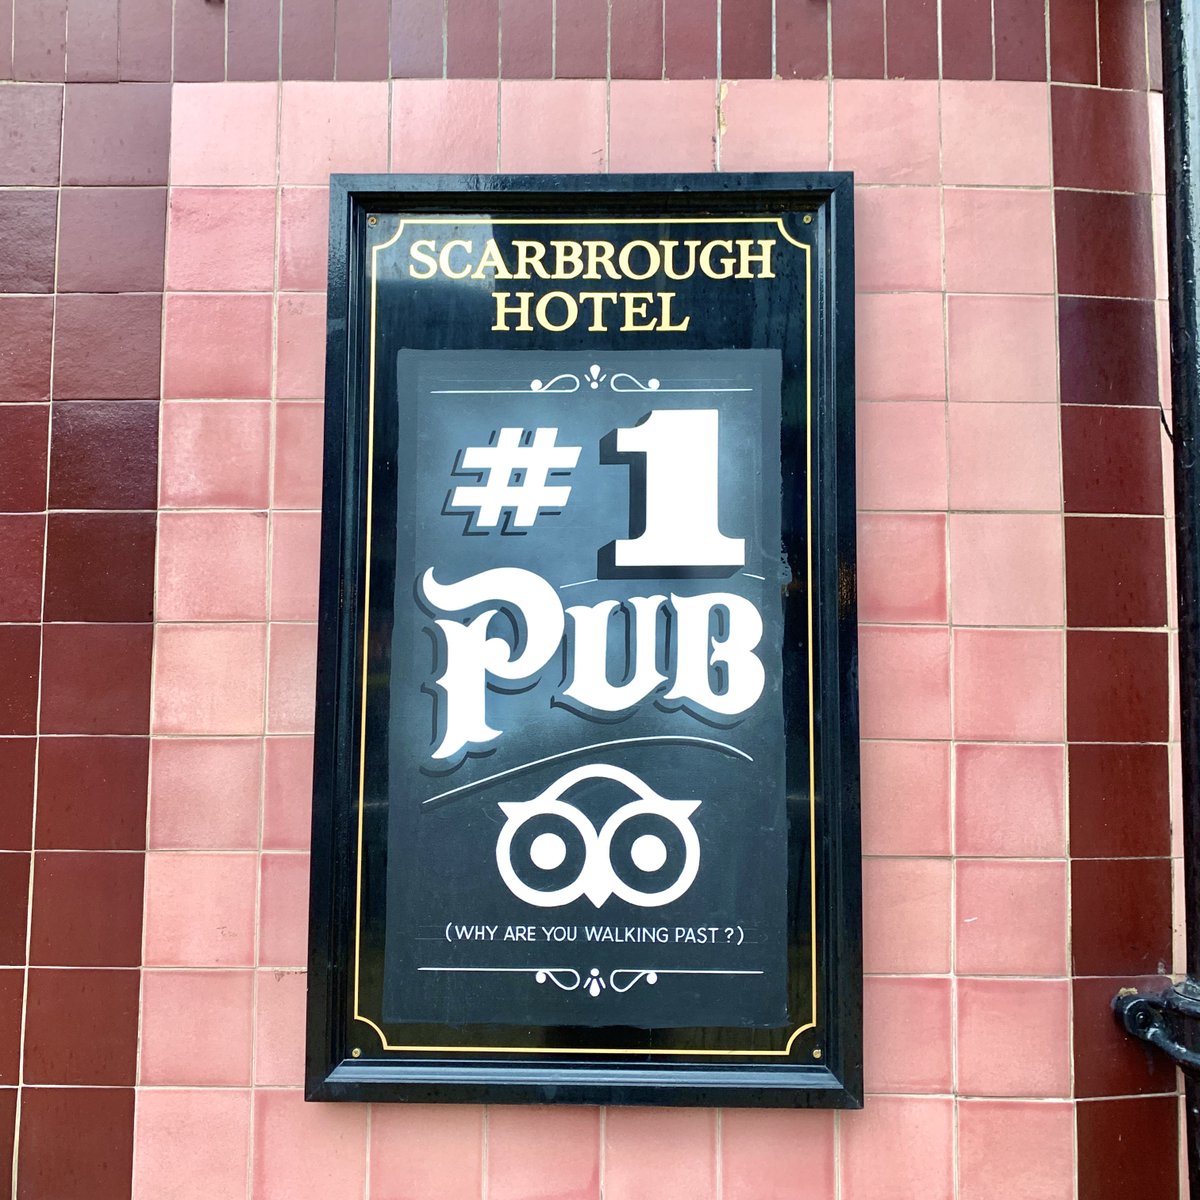 Did you know we are the #1 pub on Tripadvisor?🤩 If you have visited us during these predicament times, please leave us a review✍️ Let’s keep the Scarbrough Taps at #1 🥳 #nicholsons #nicholsonspubs #leeds #leedslife #pubs #tripadvisor